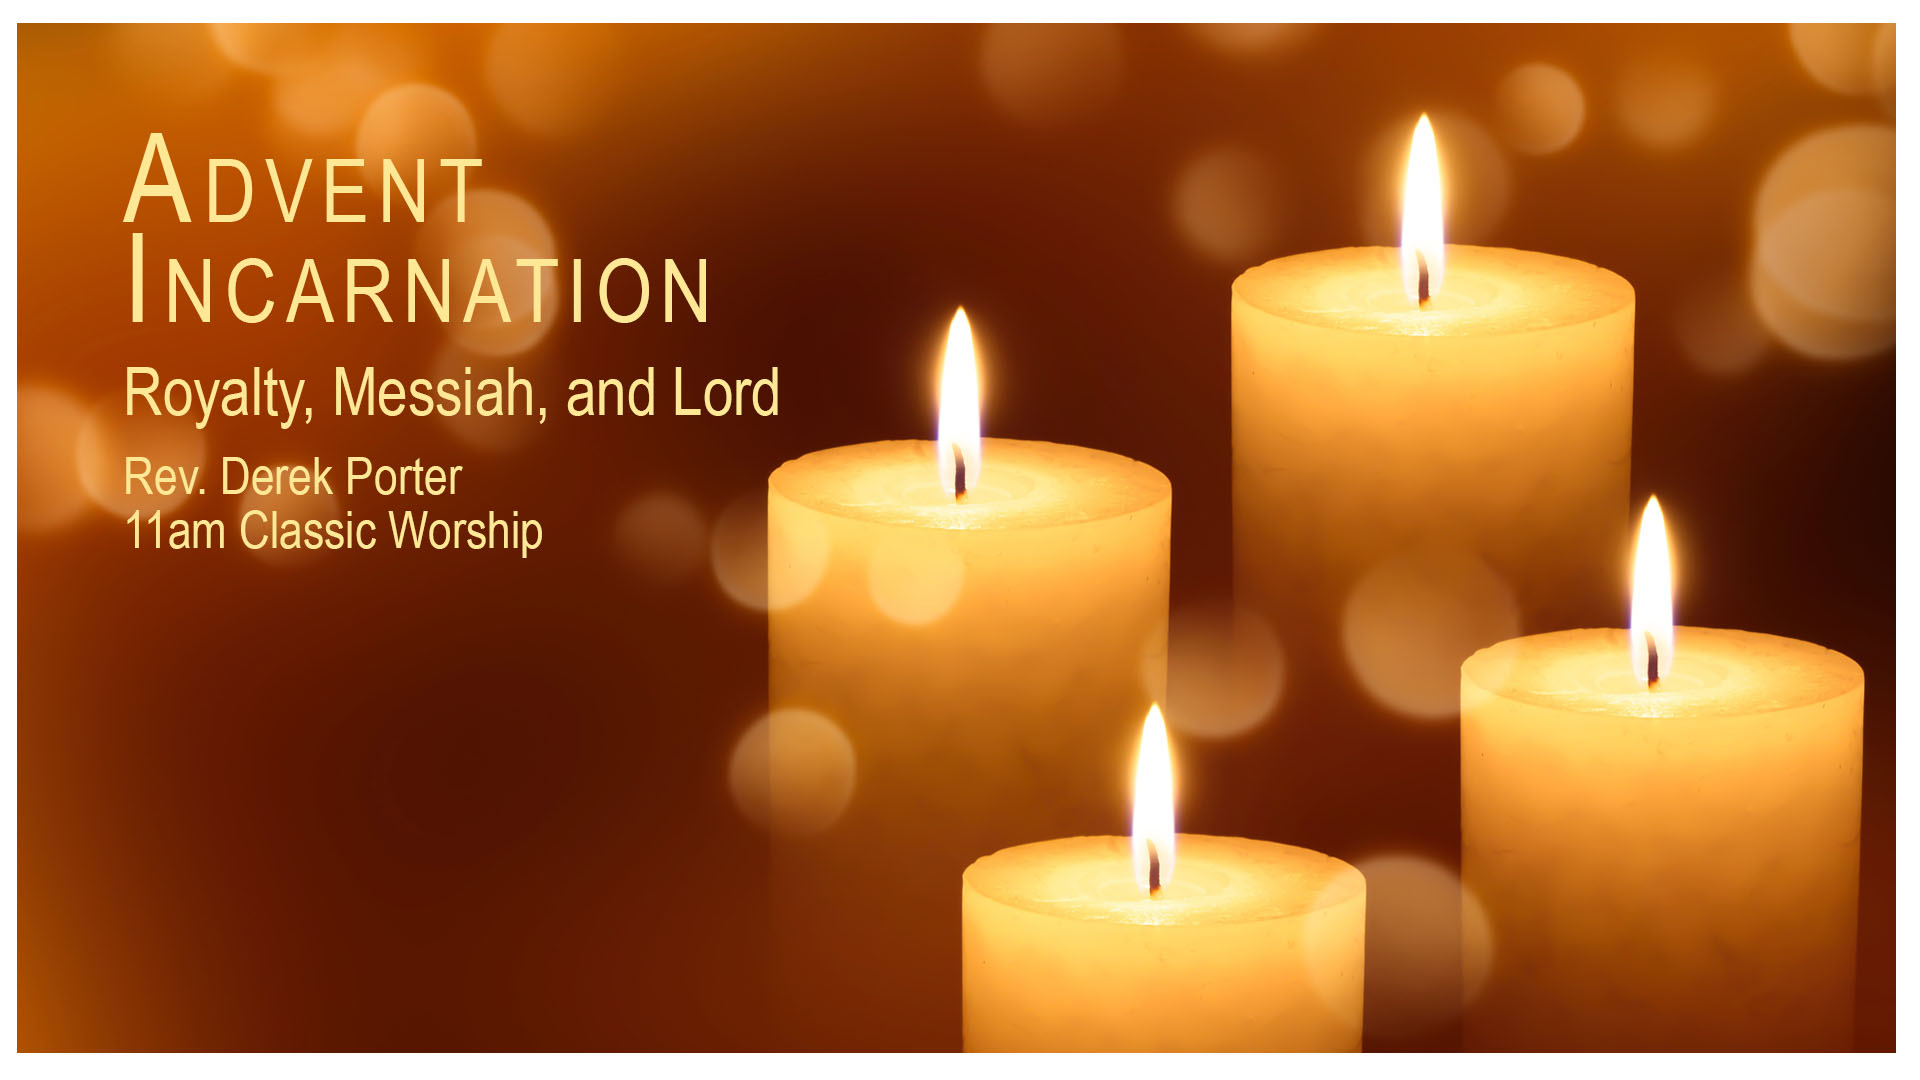 Advent Incarnation: Royalty, Messiah, and Lord